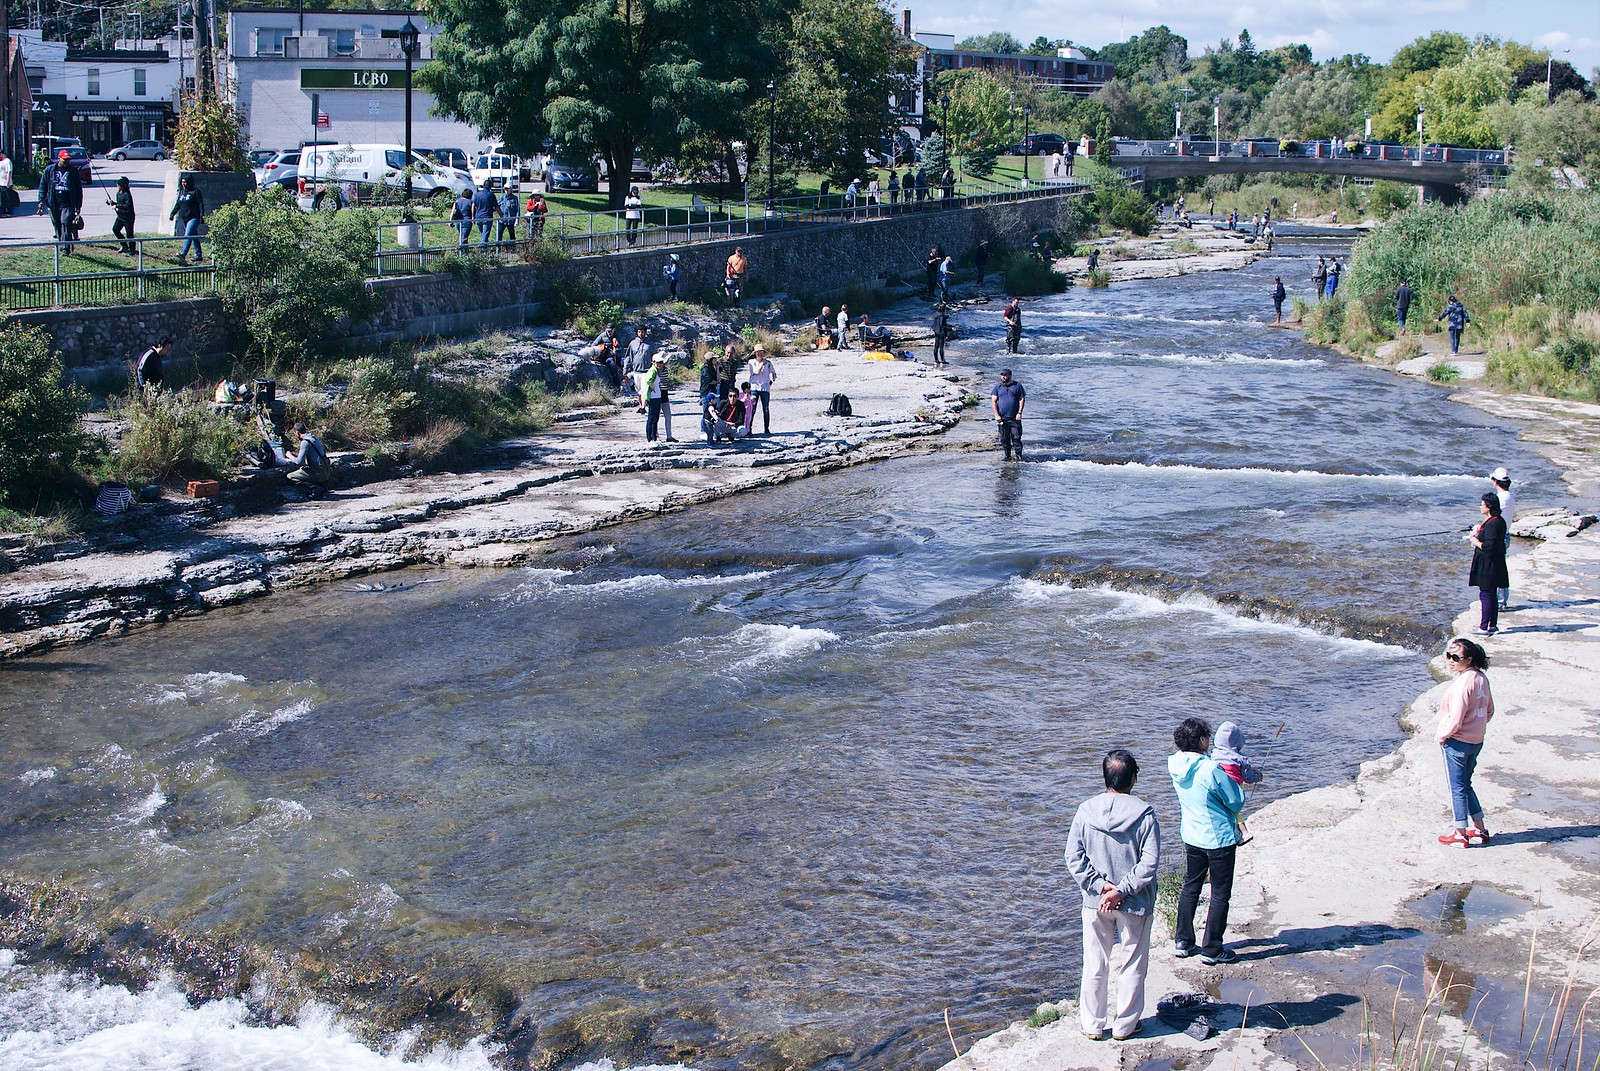 People watching the salmon migration in Port Hope